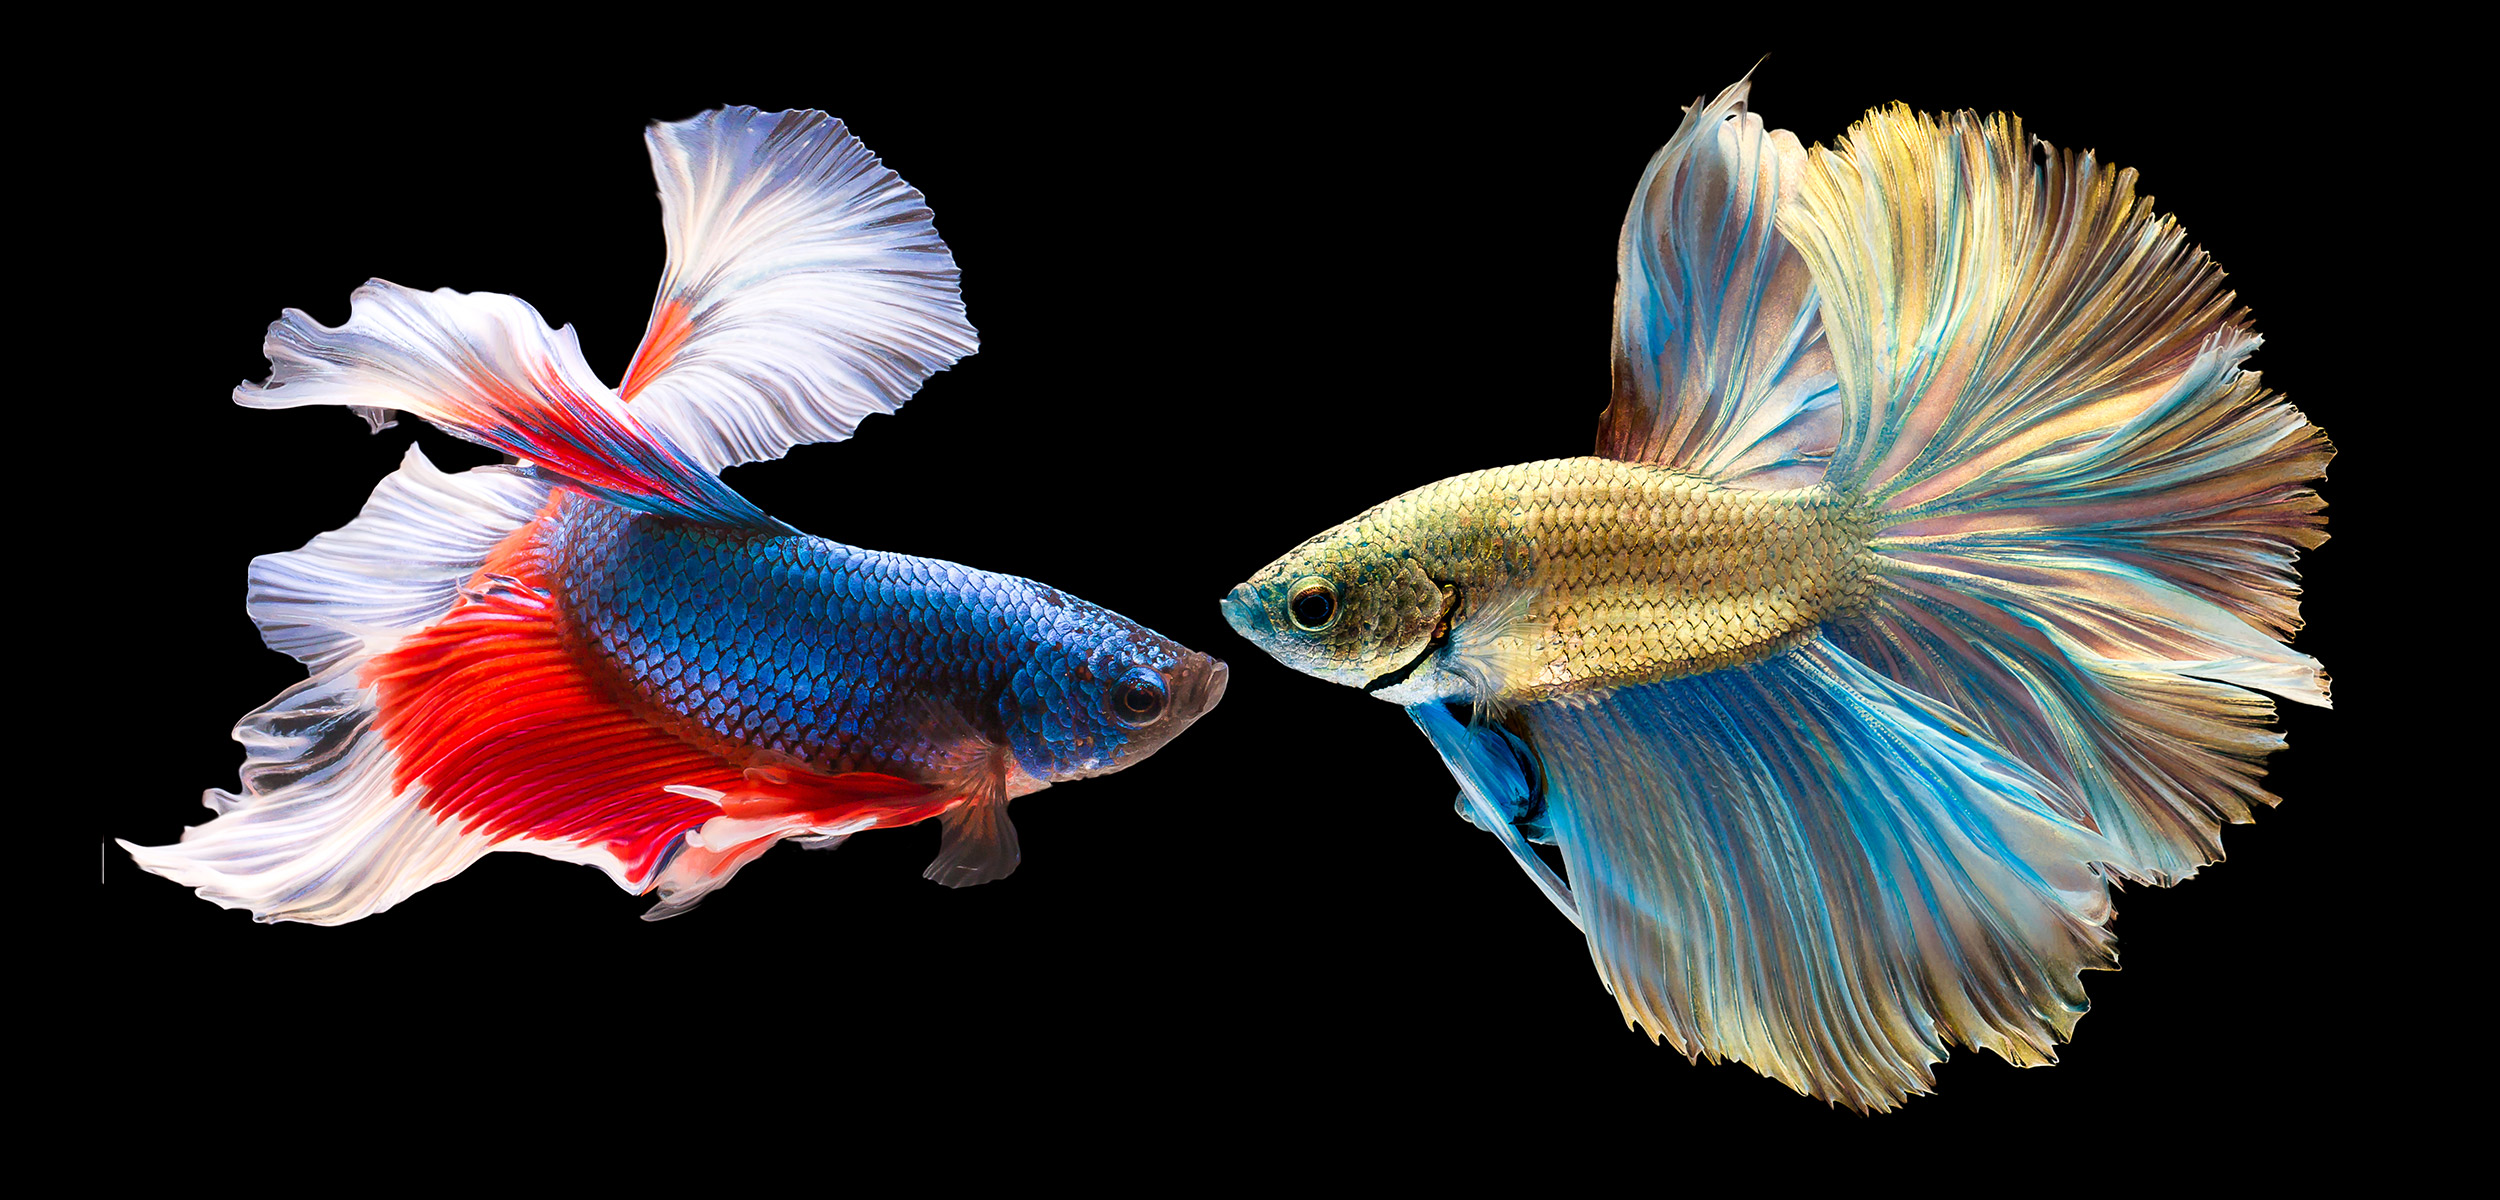 2Fish - Growing Your Relationships: You and Your Inner Circle